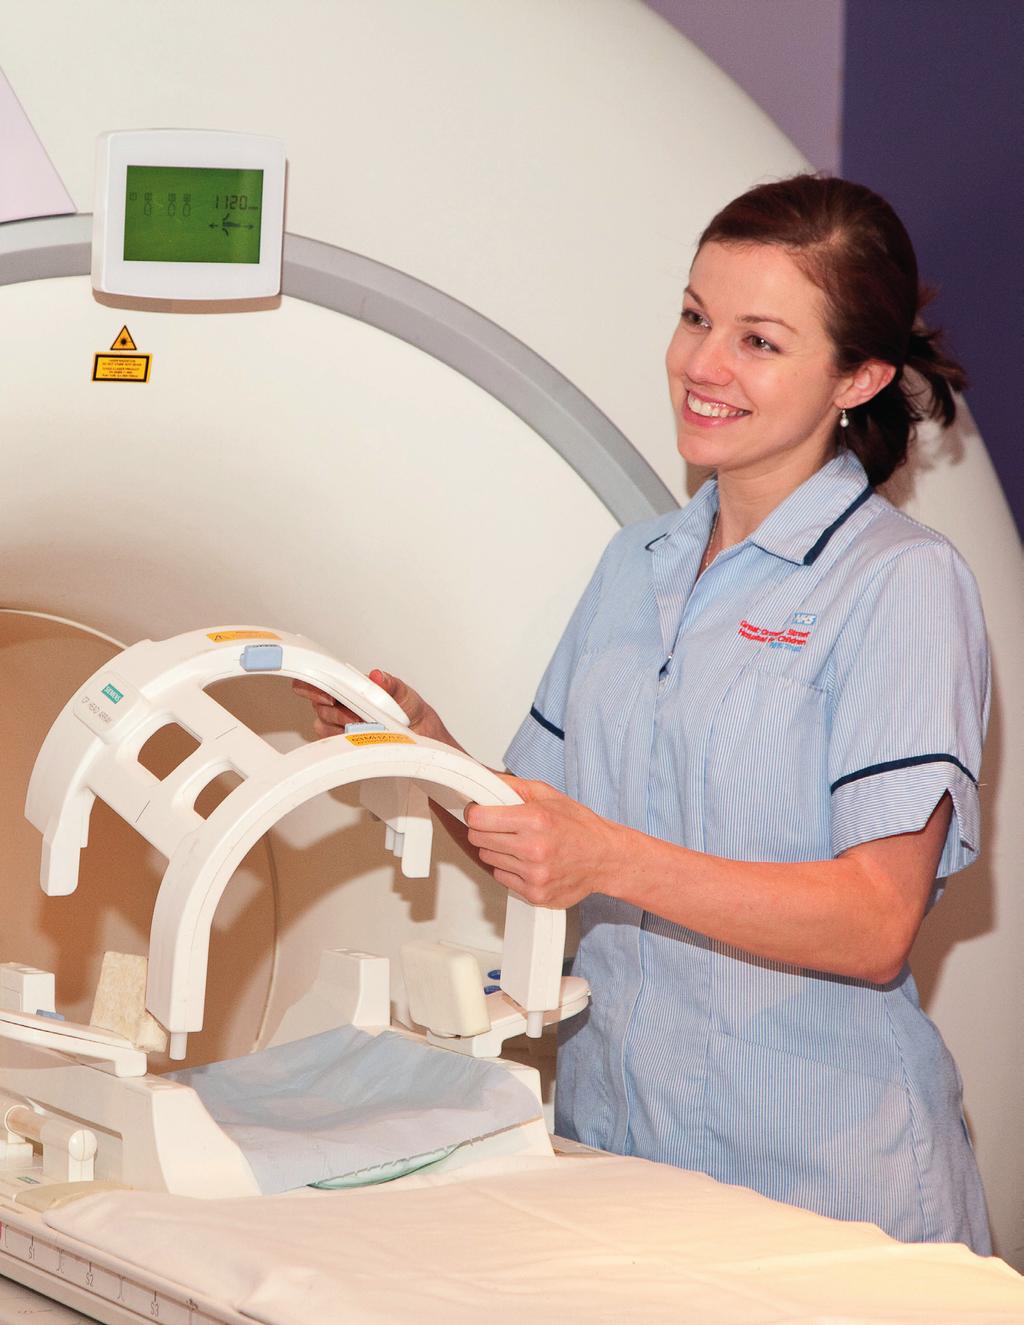 Your child is having an MRI scan